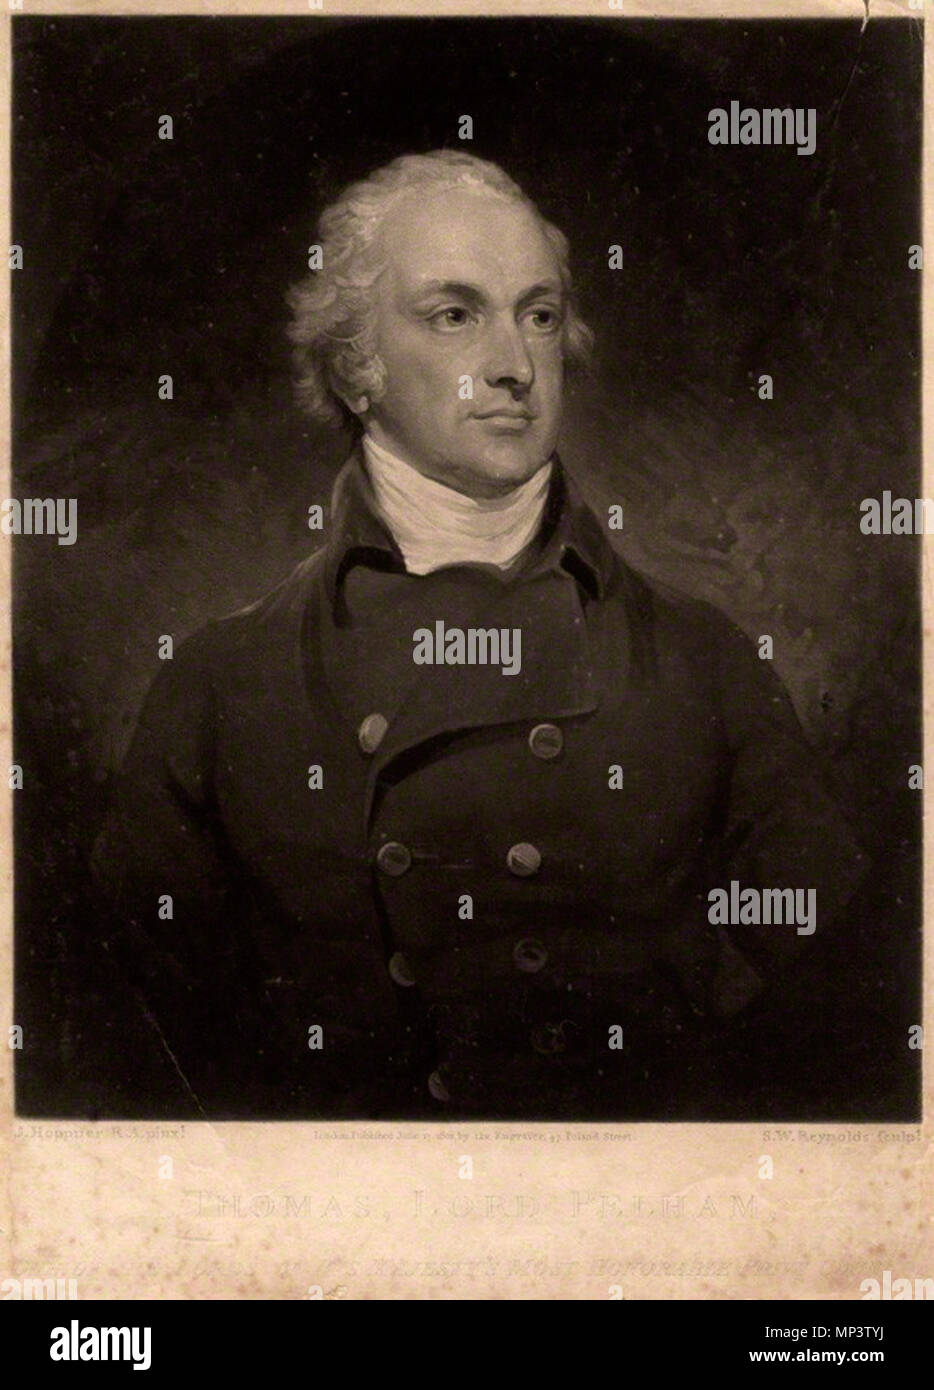 by and published by Samuel William Reynolds, after  John Hoppner, mezzotint, published 17 June 1802    . Portrait of Thomas Pelham, 2nd Earl of Chichester by Samuel William Reynolds (1773-1835), after John Hoppner (1758-1810). Published by Samuel William Reynolds. published 17 June 1802.   1022 Portrait of Thomas Pelham 2nd Earl of Chichester Stock Photo